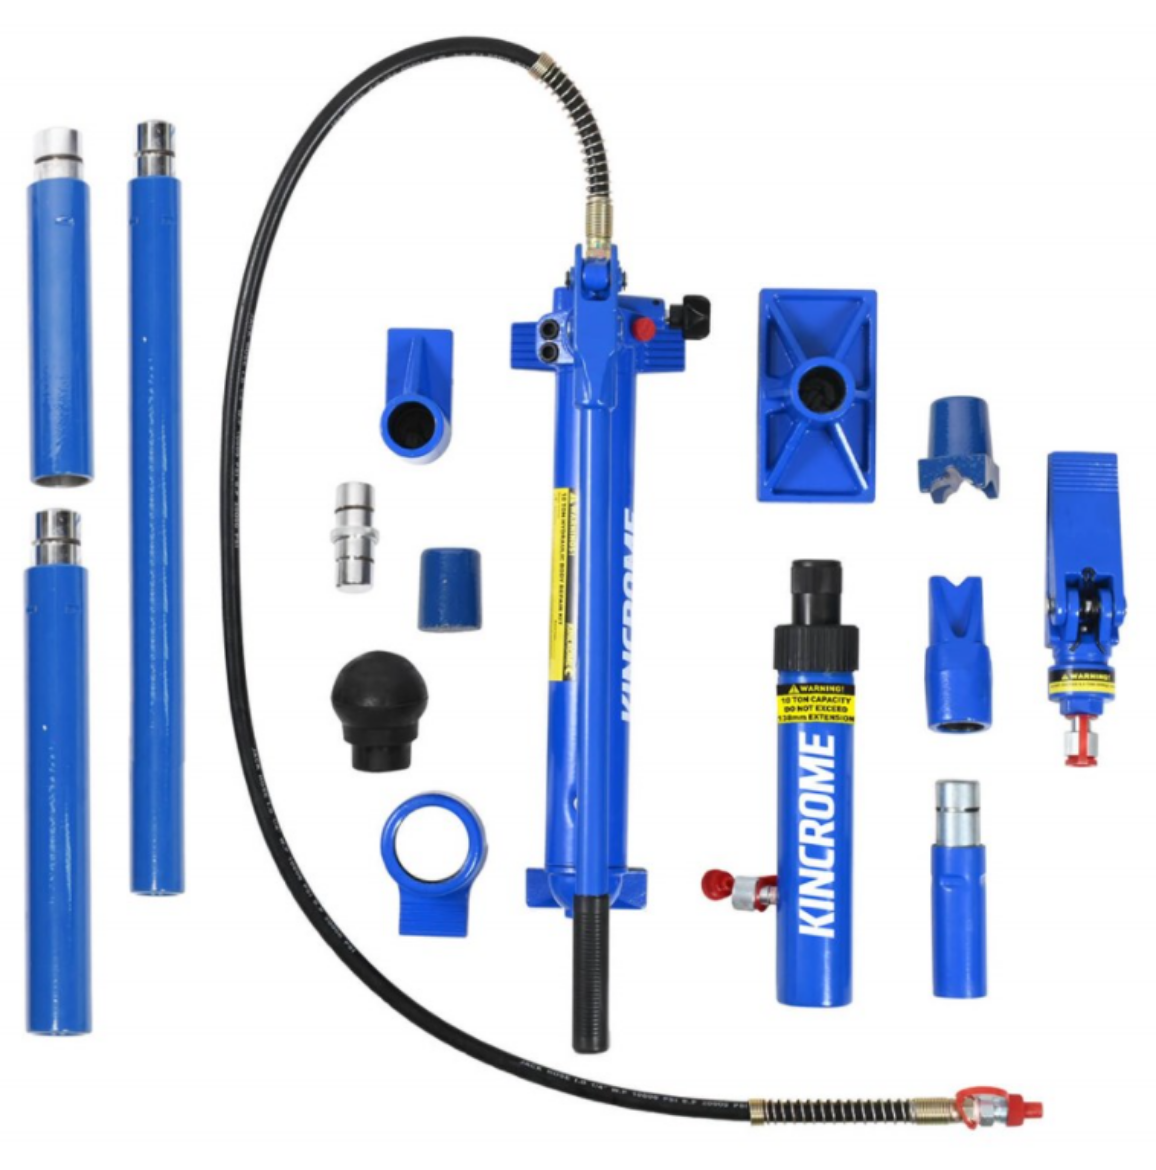 Picture of KINCROME HYDRAULIC BODY REPAIR KIT - 15 PIECE 10 TONNE